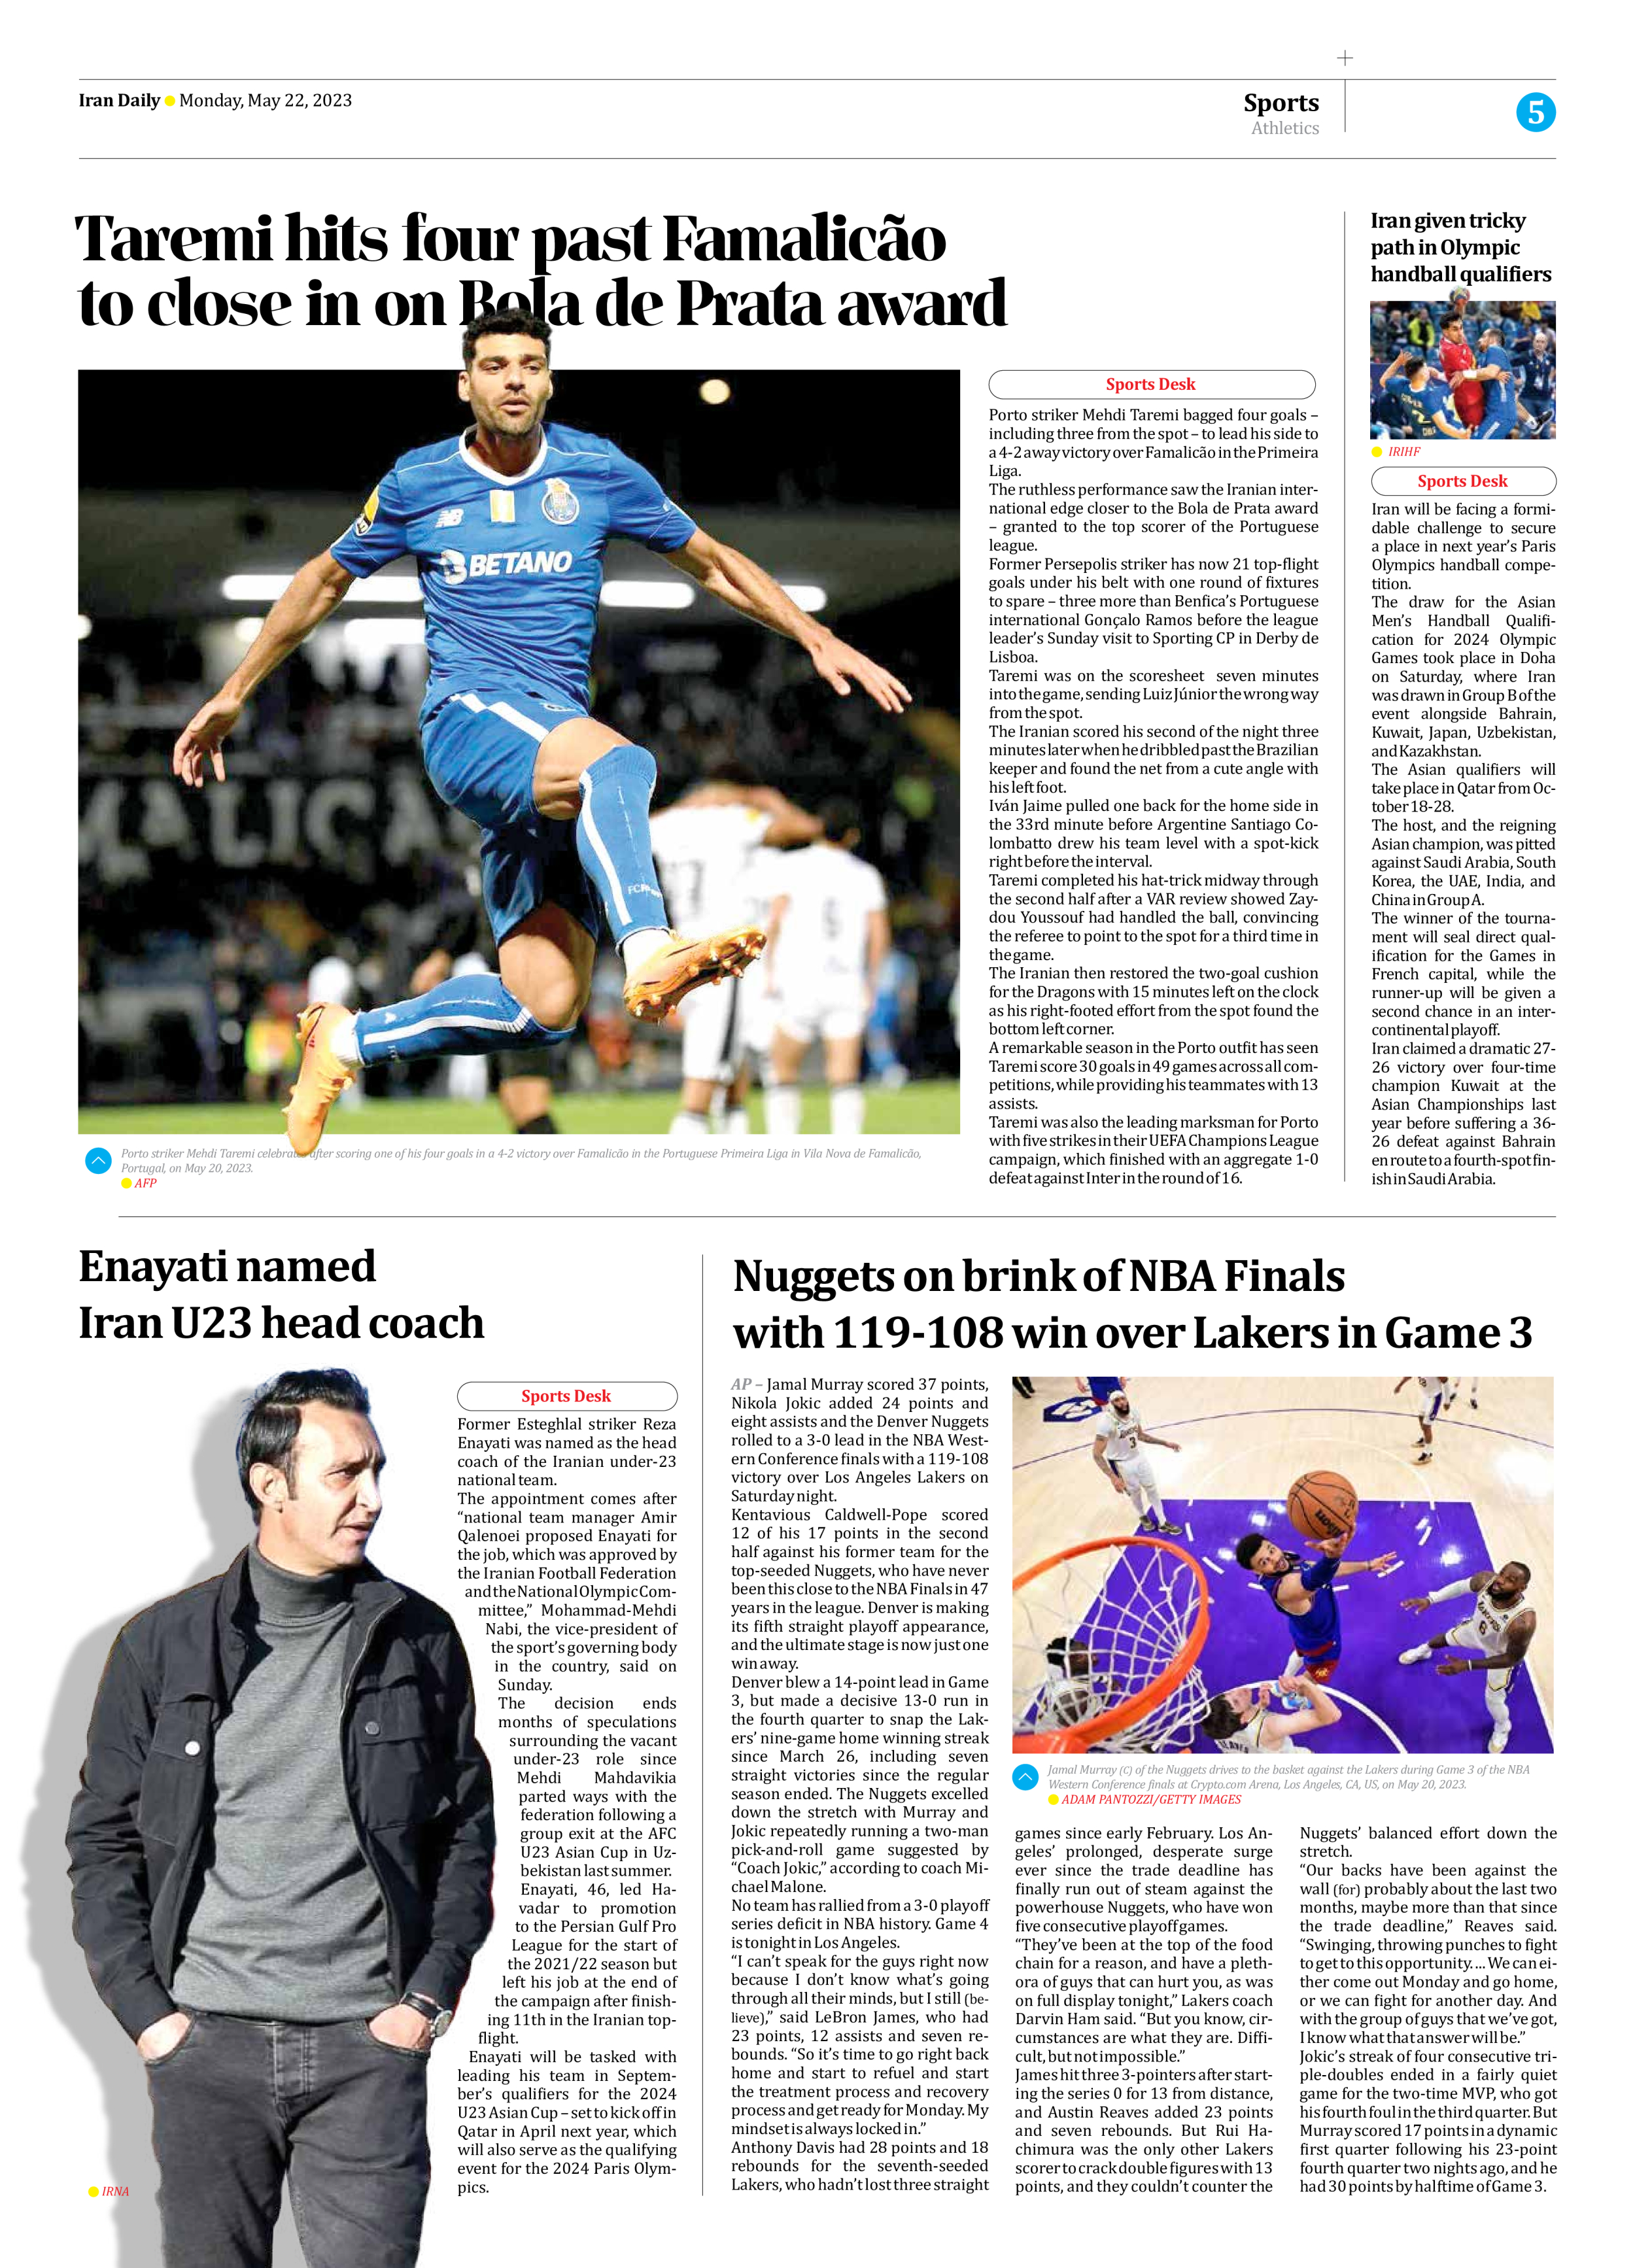 Iran Daily - Number Seven Thousand Two Hundred and Ninety Seven - 22 May 2023 - Page 5